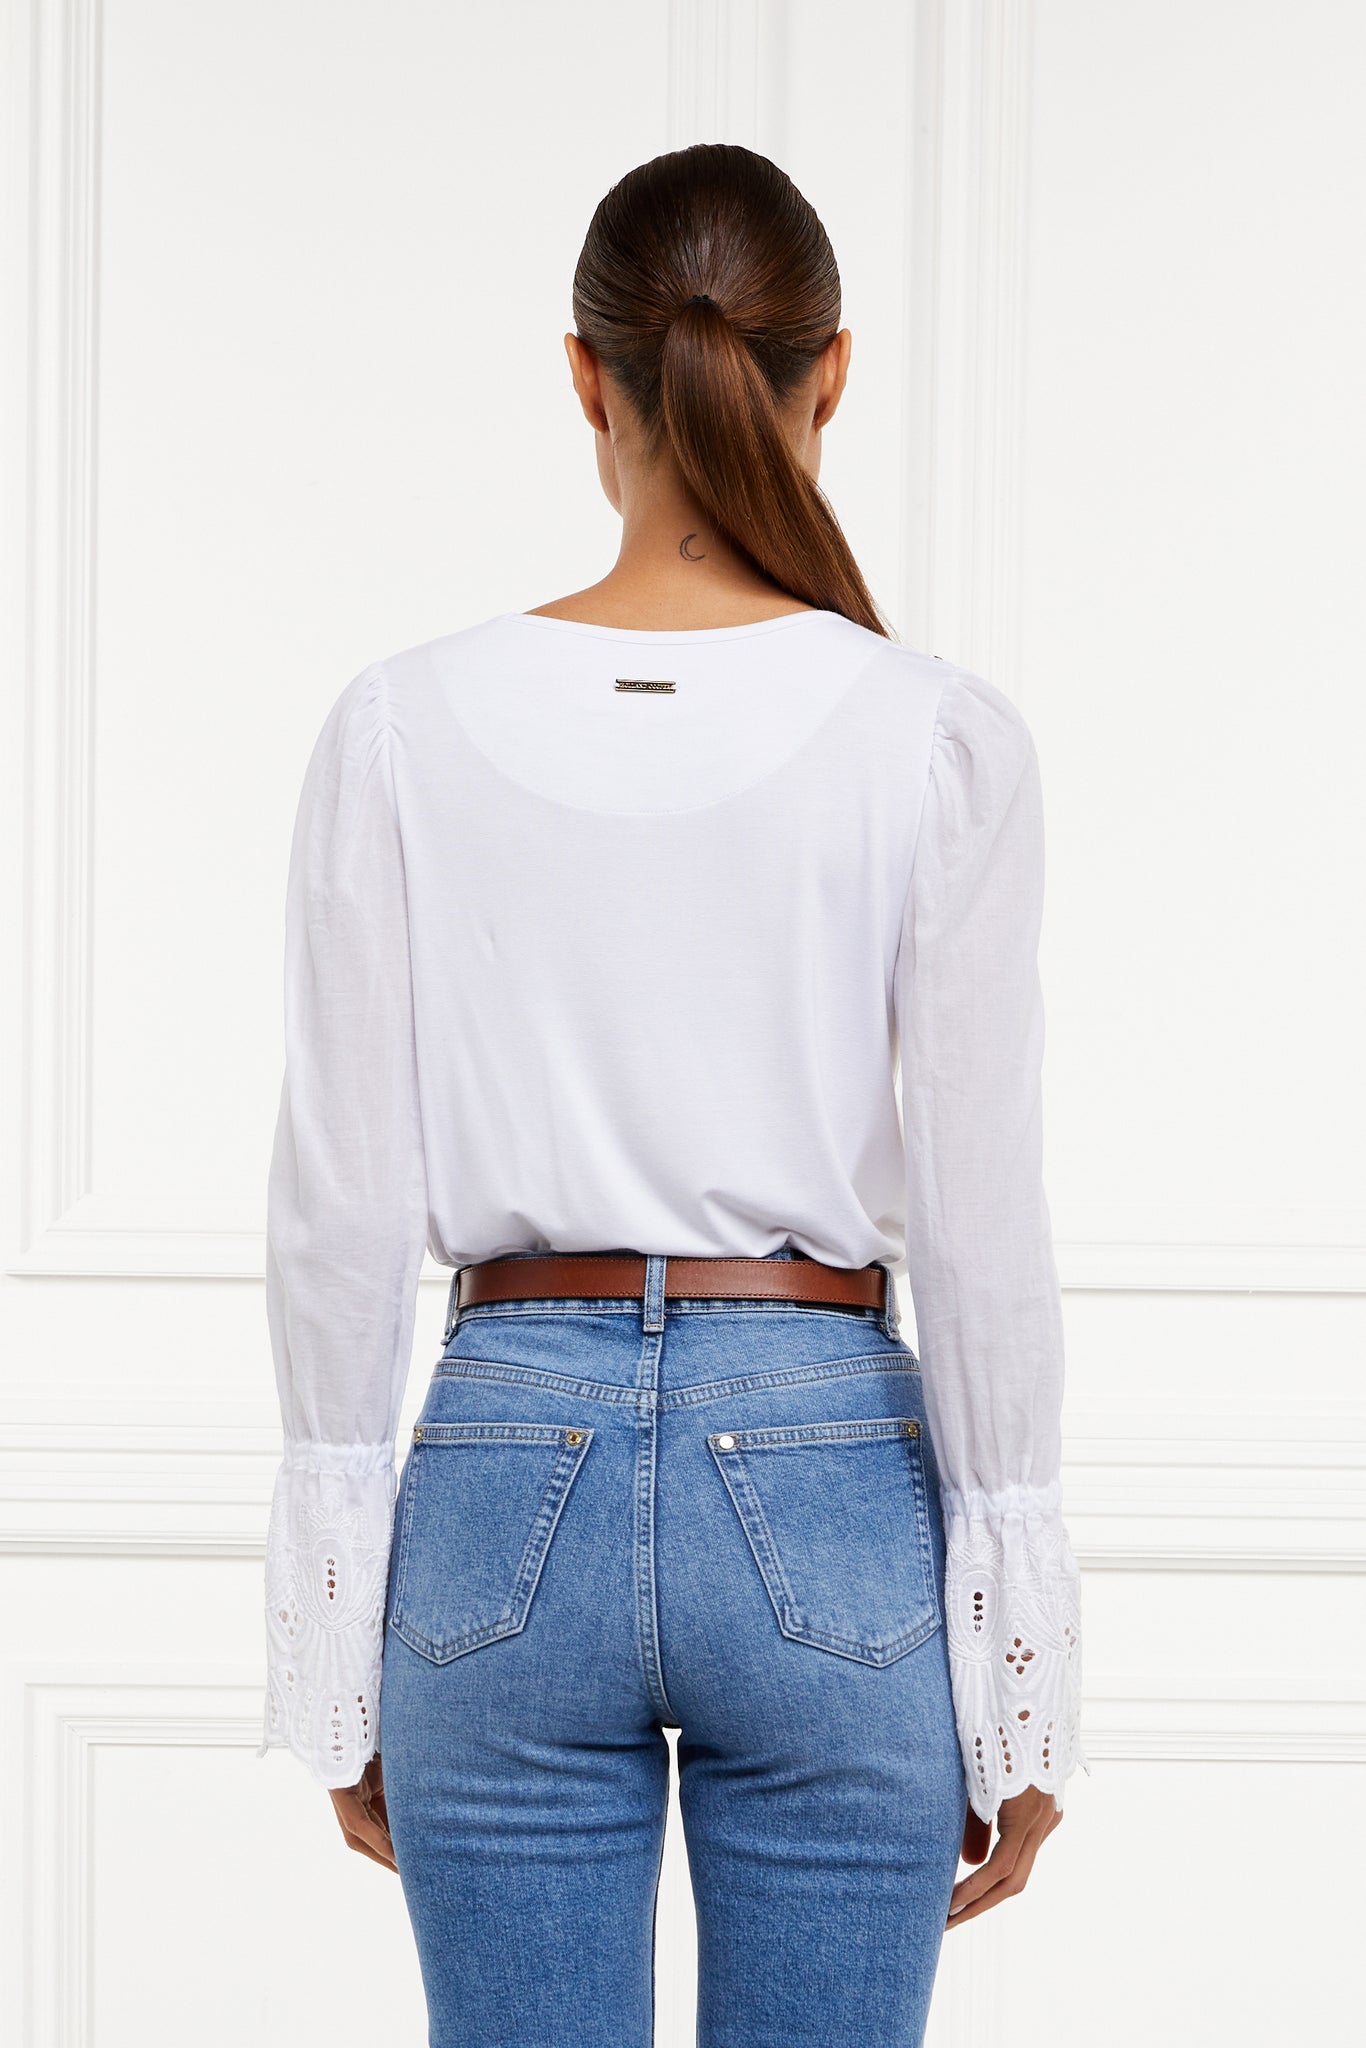 back image of Crew neck top with voluminous sleeves with gathered details at the shoulder and broderie detailing above the cuff and detailed with Holland Cooper rivets on the shoulders and subtle gold placket on the balk yolk